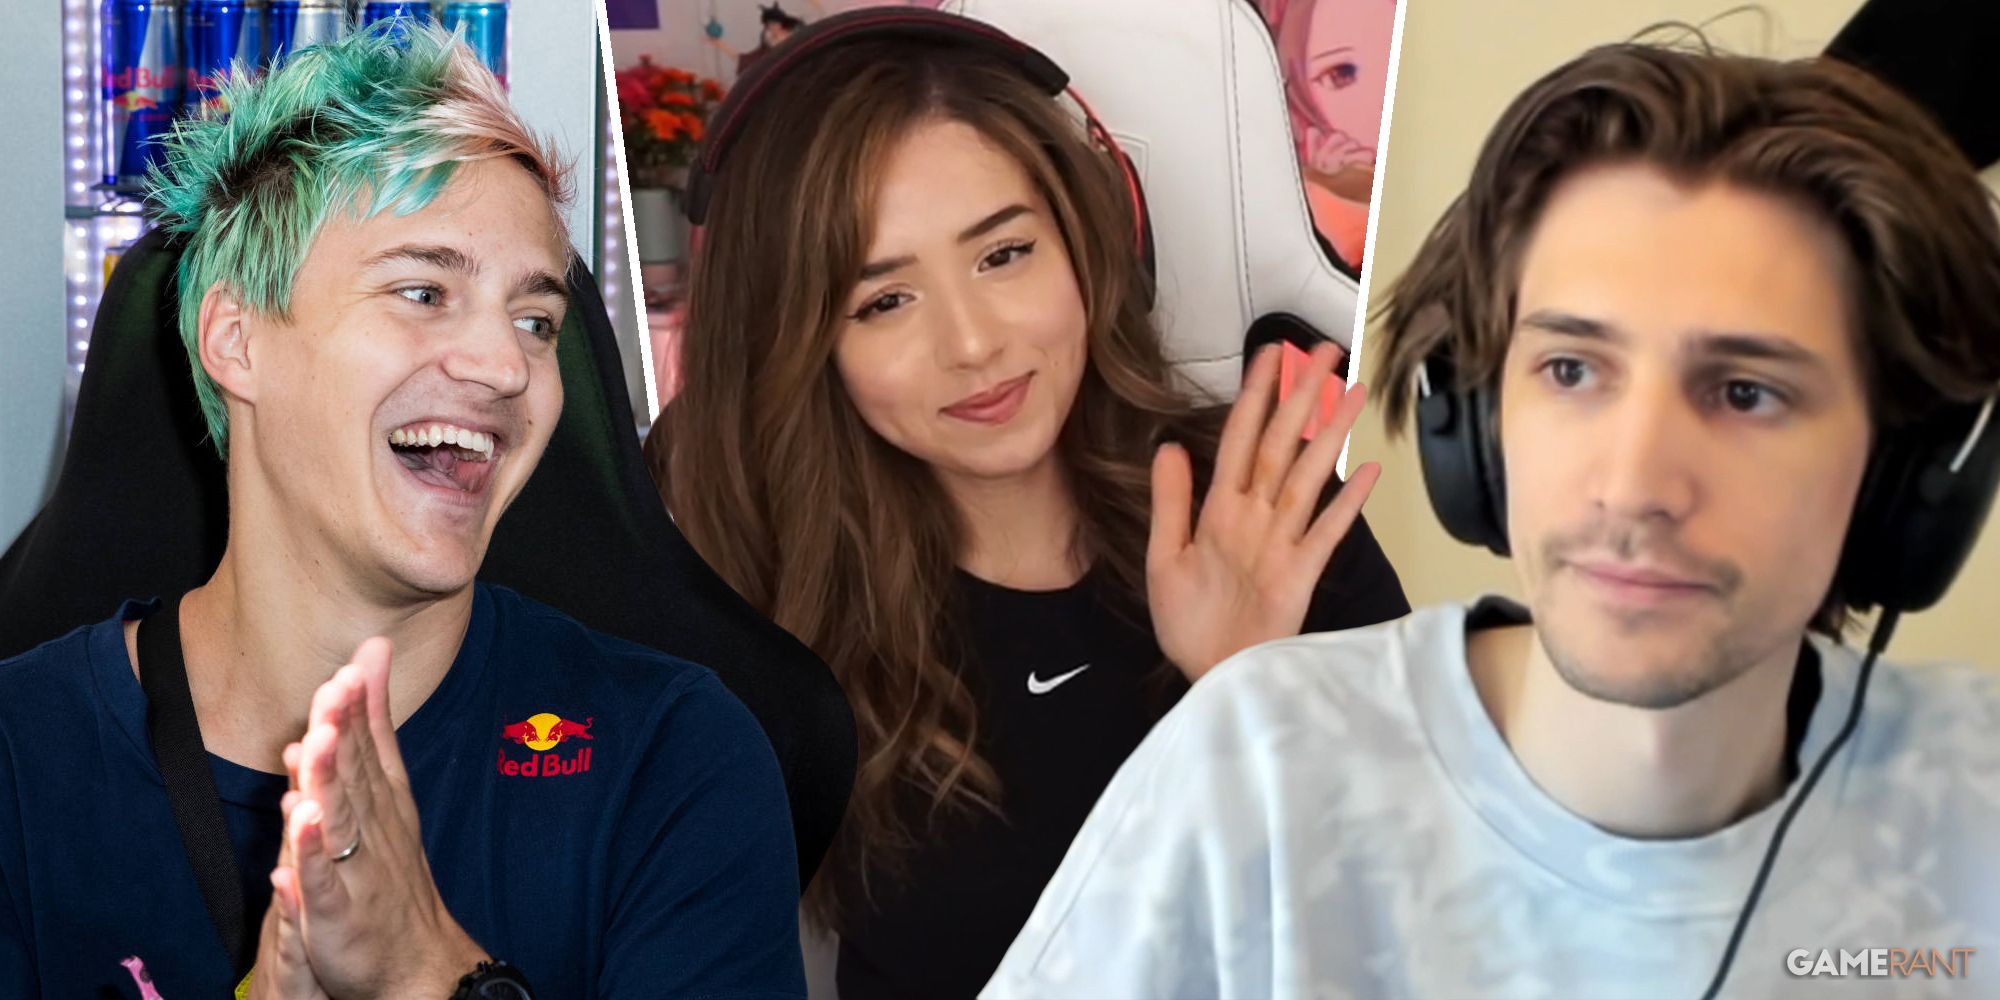 5 TikTokers who became popular Twitch streamers